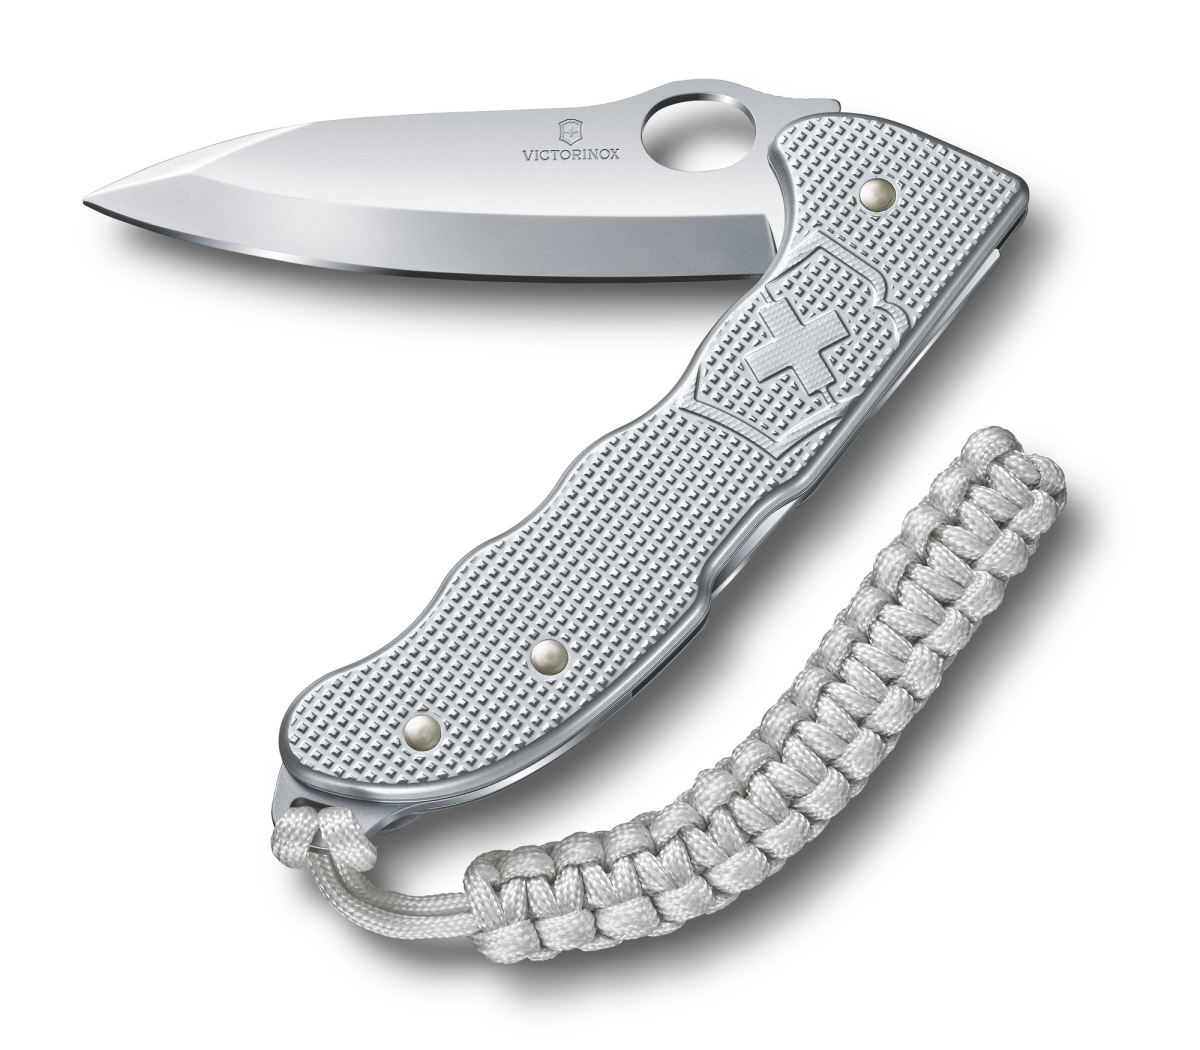 Swiss Army Brands VIC-0.9415.M26 2019 Victorinox Hunter Pro Alox Knife with Clip & Paracord 130 mm -  Swiss Arms